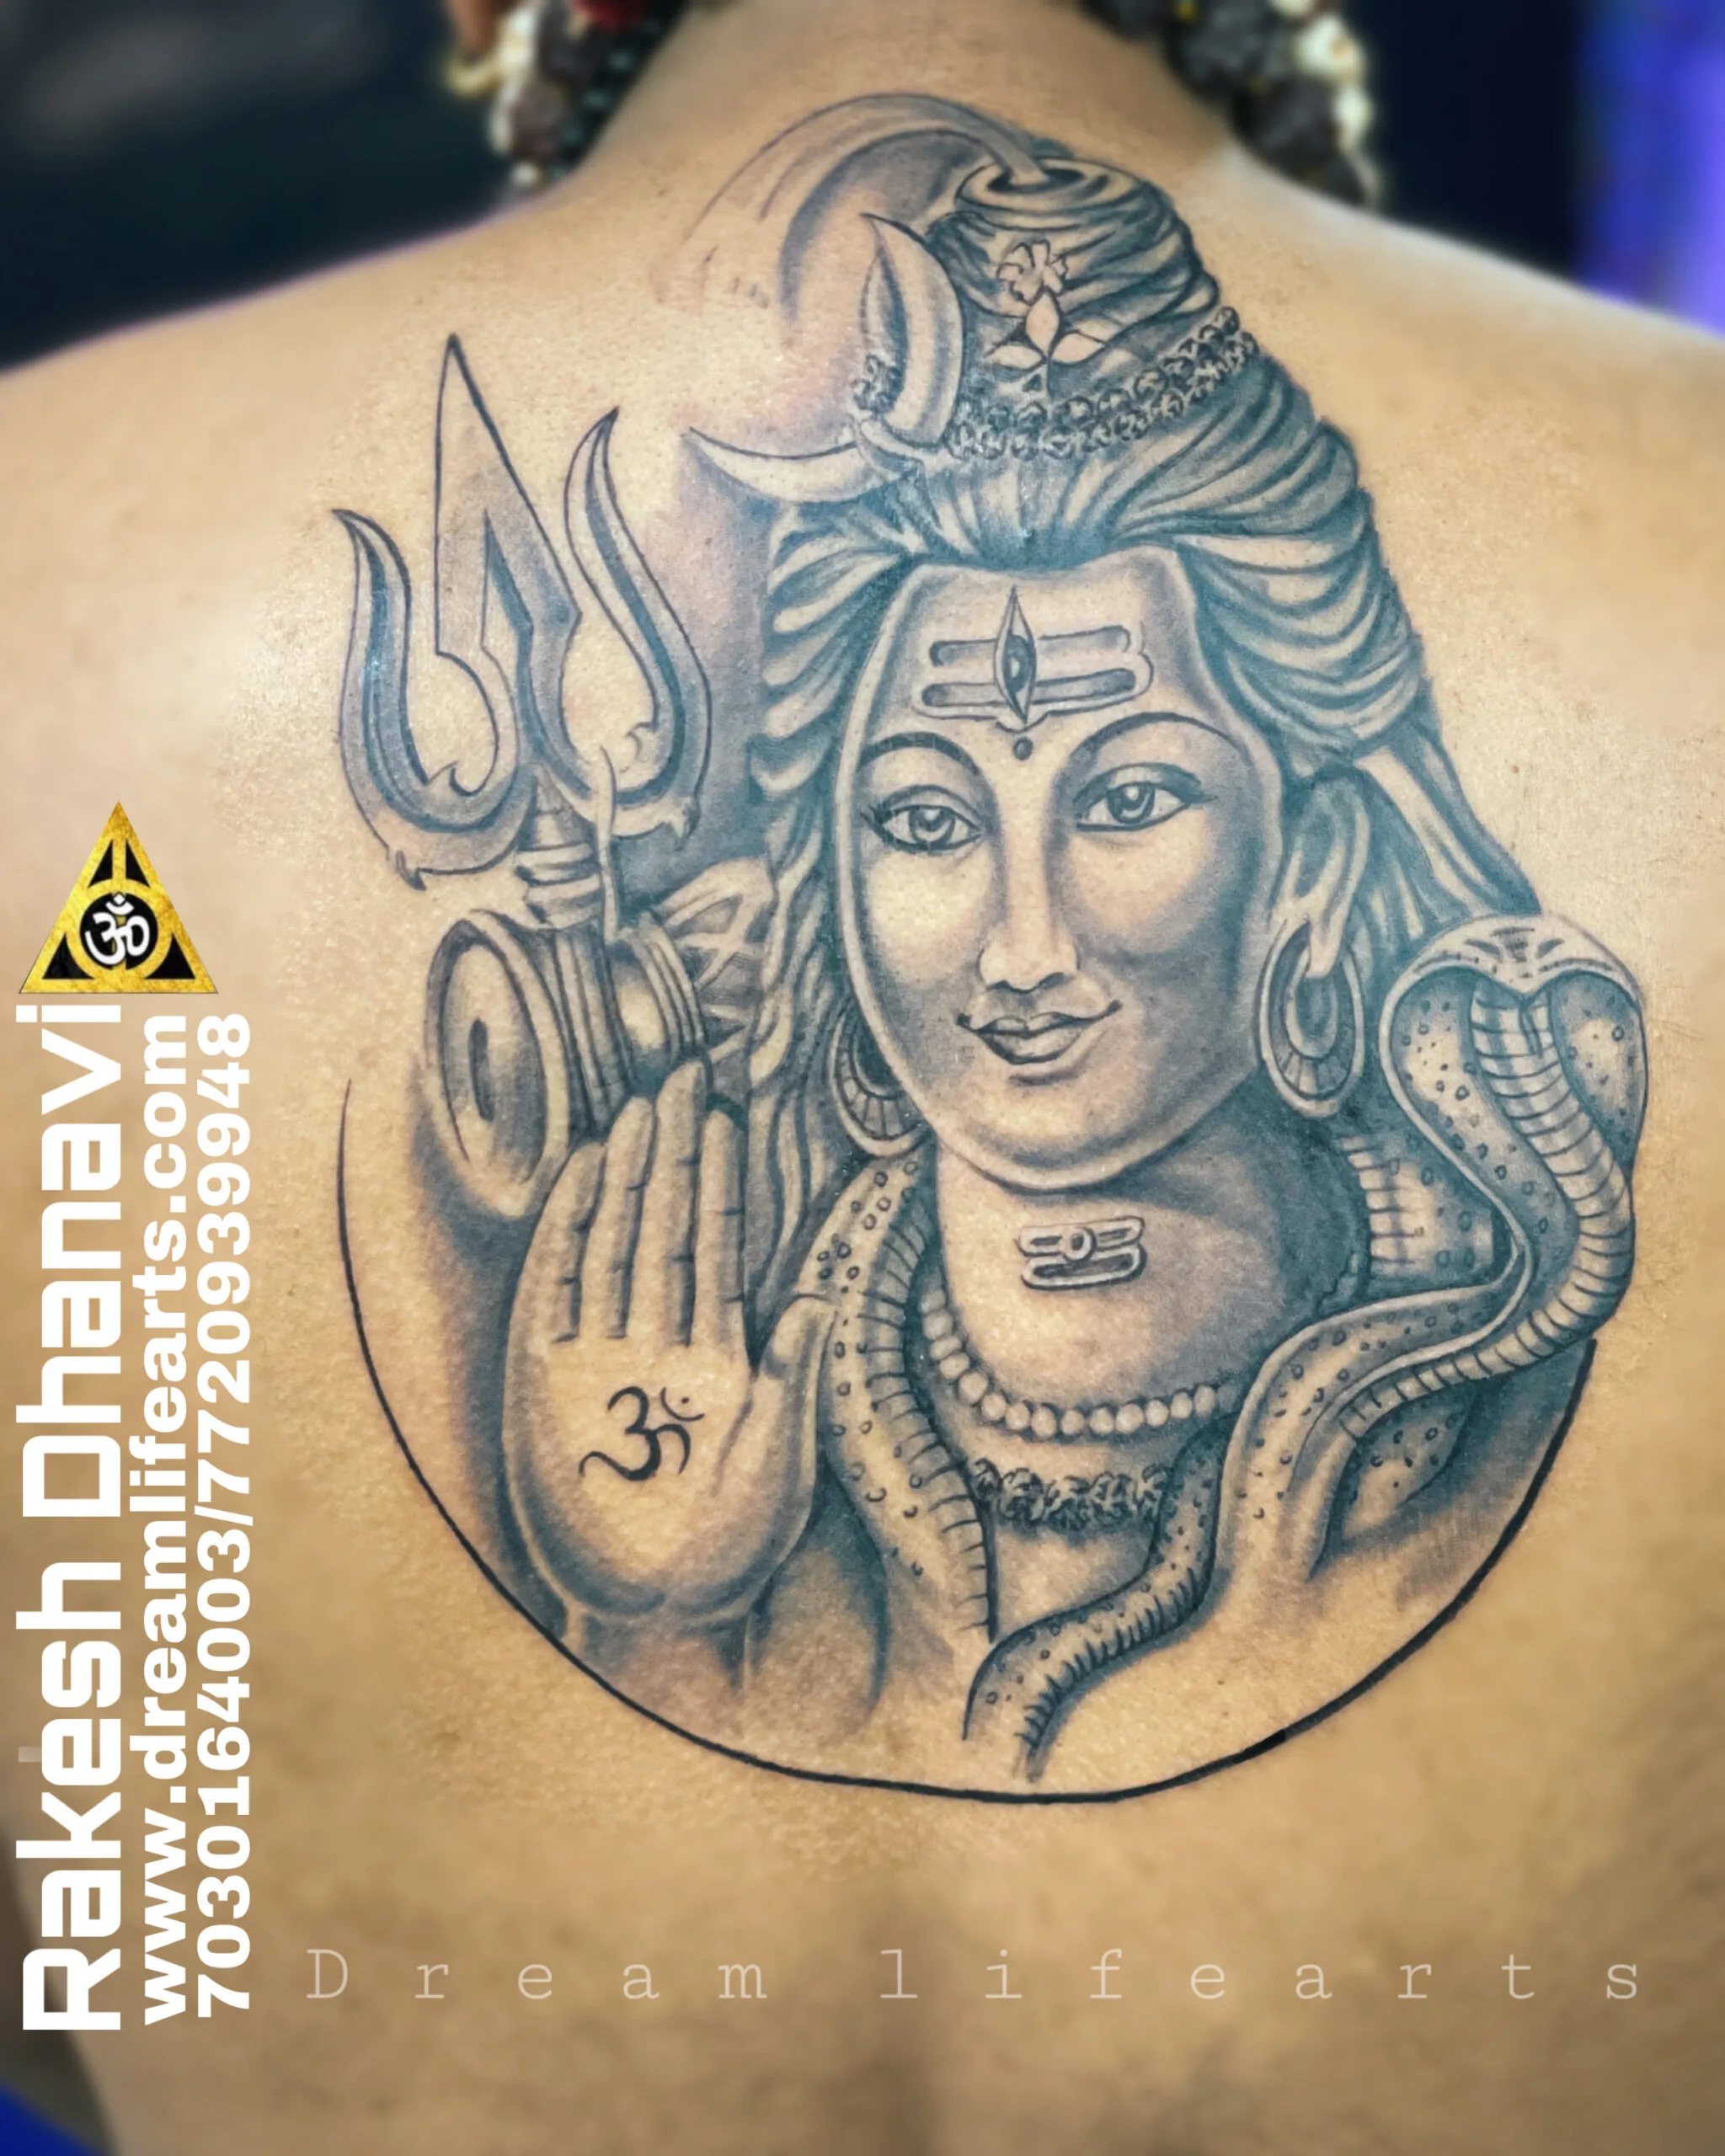 Anahata Tattoos In Noida in Noida - Best Beauty Parlours in Noida - Body  Chi Me